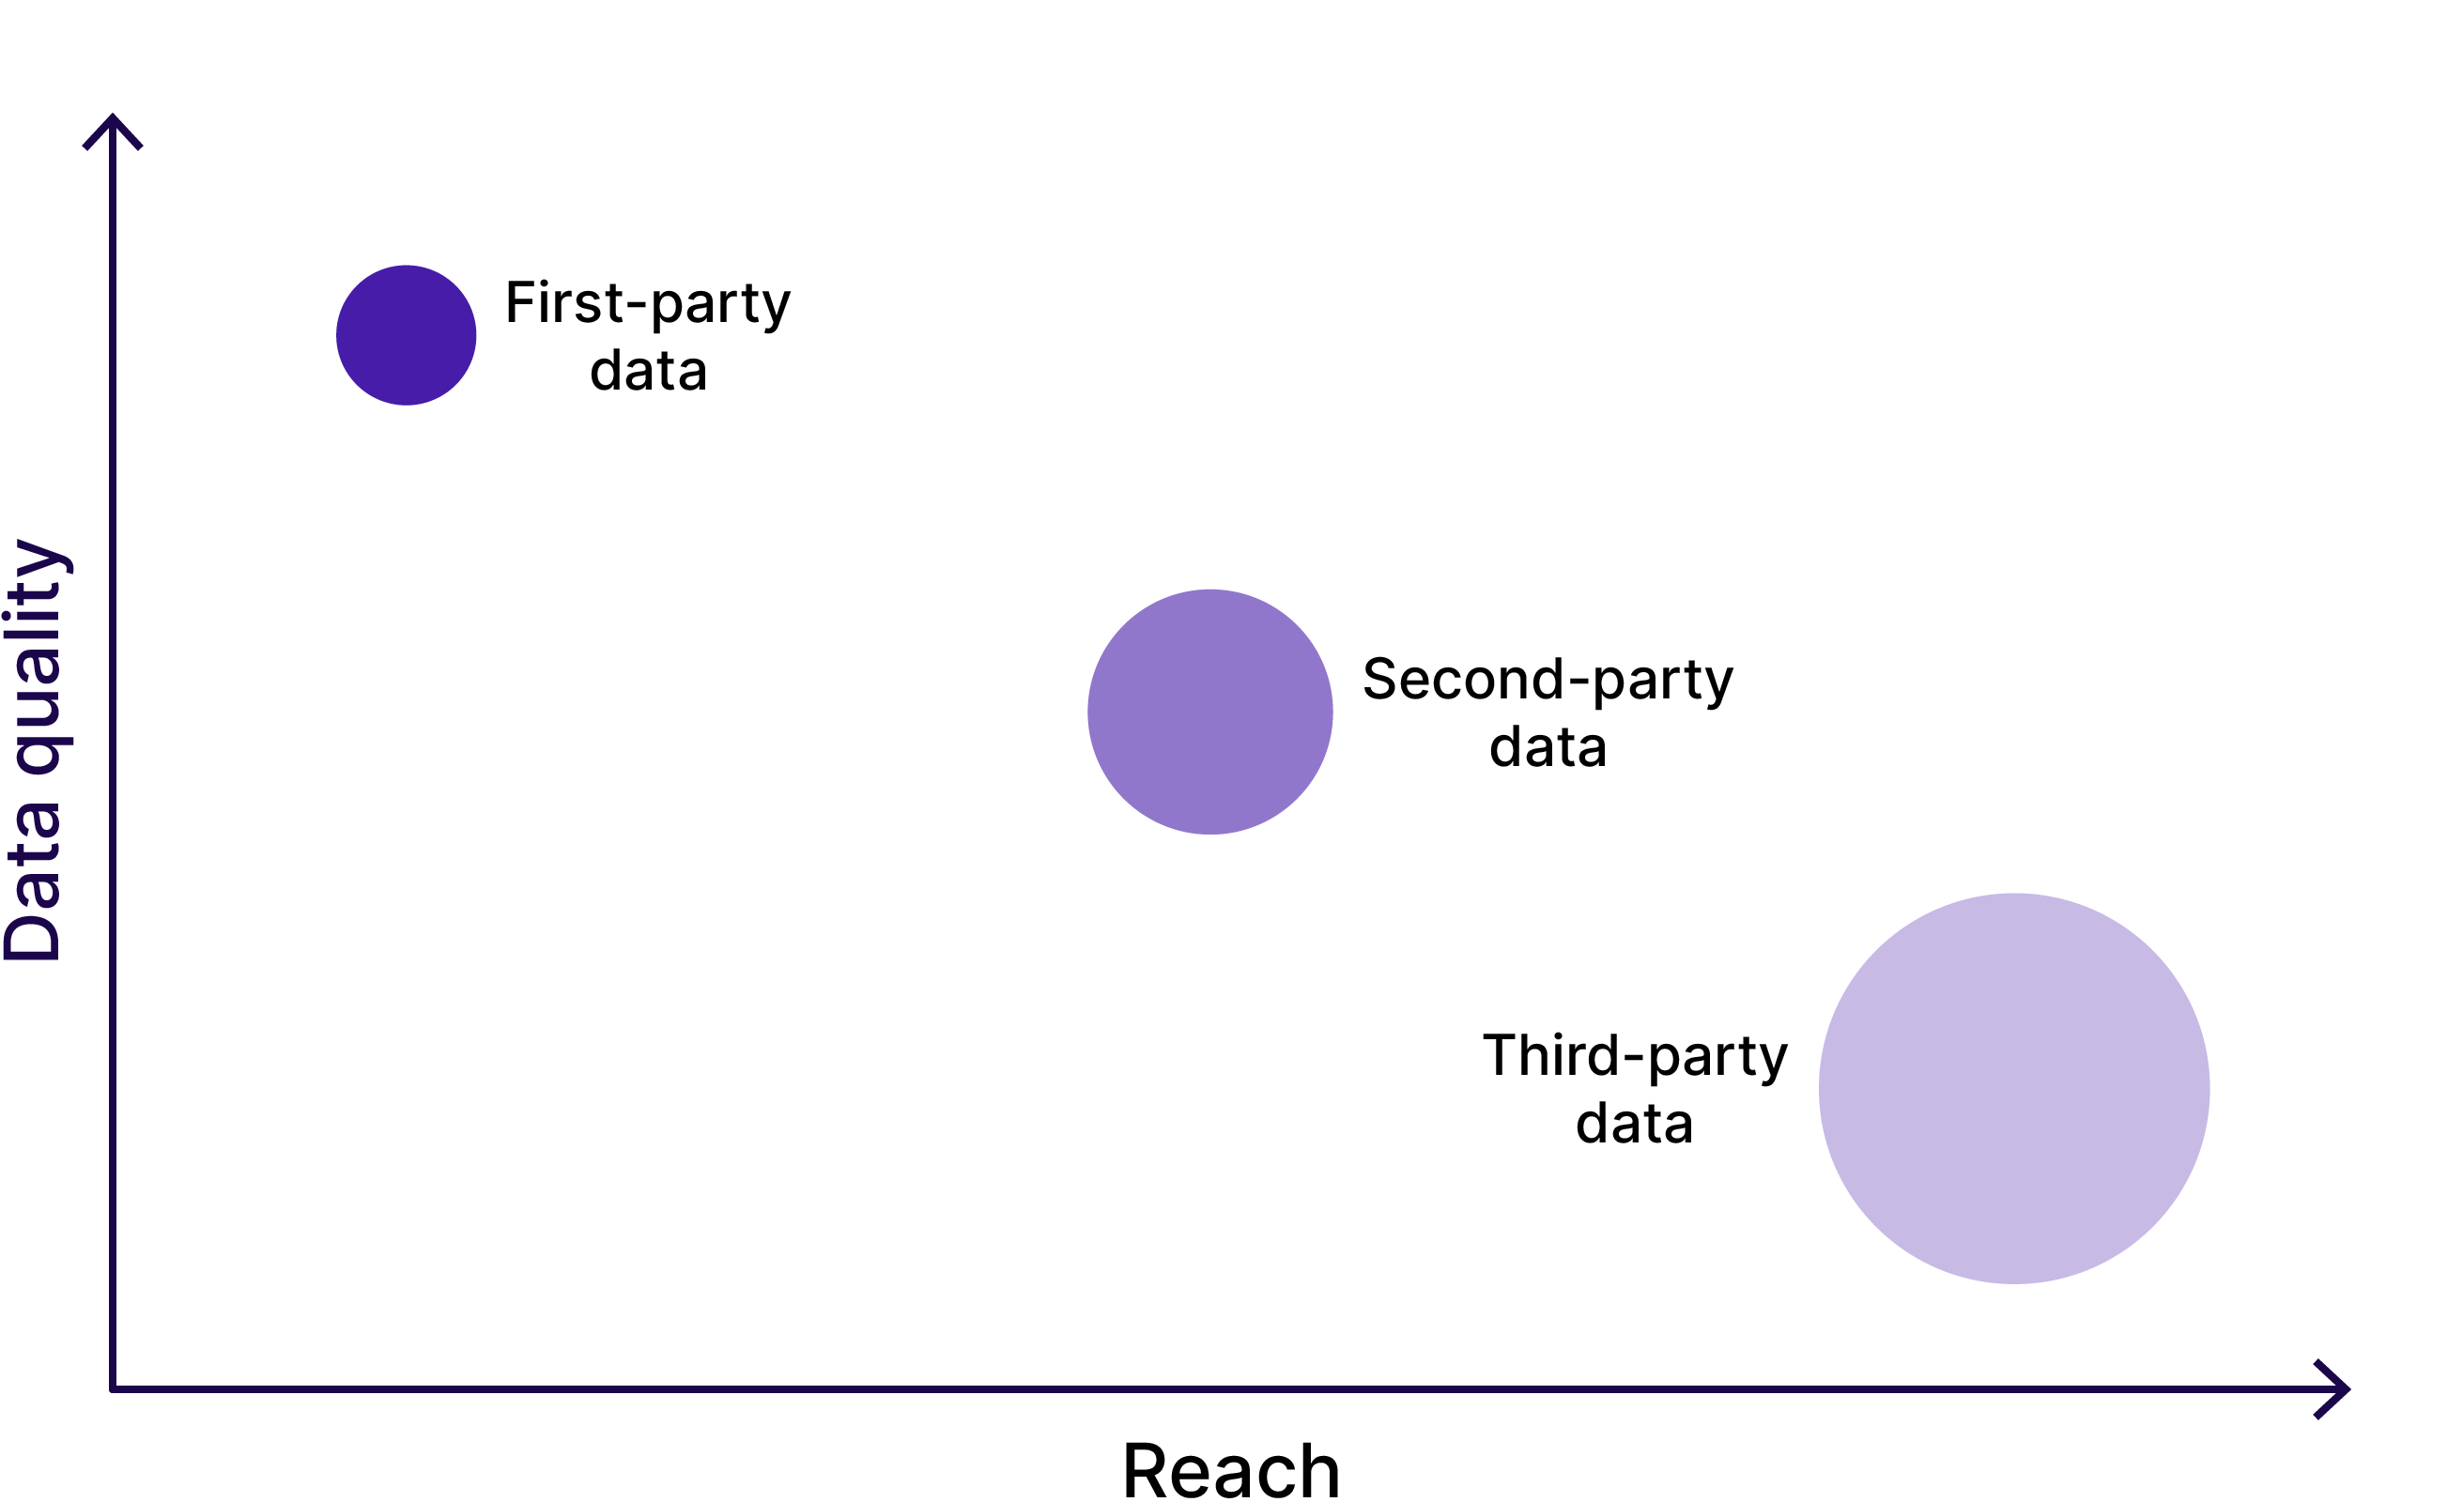 A diagram depicting the trade-off of data quality and reach between first-, second-, and third-party data.